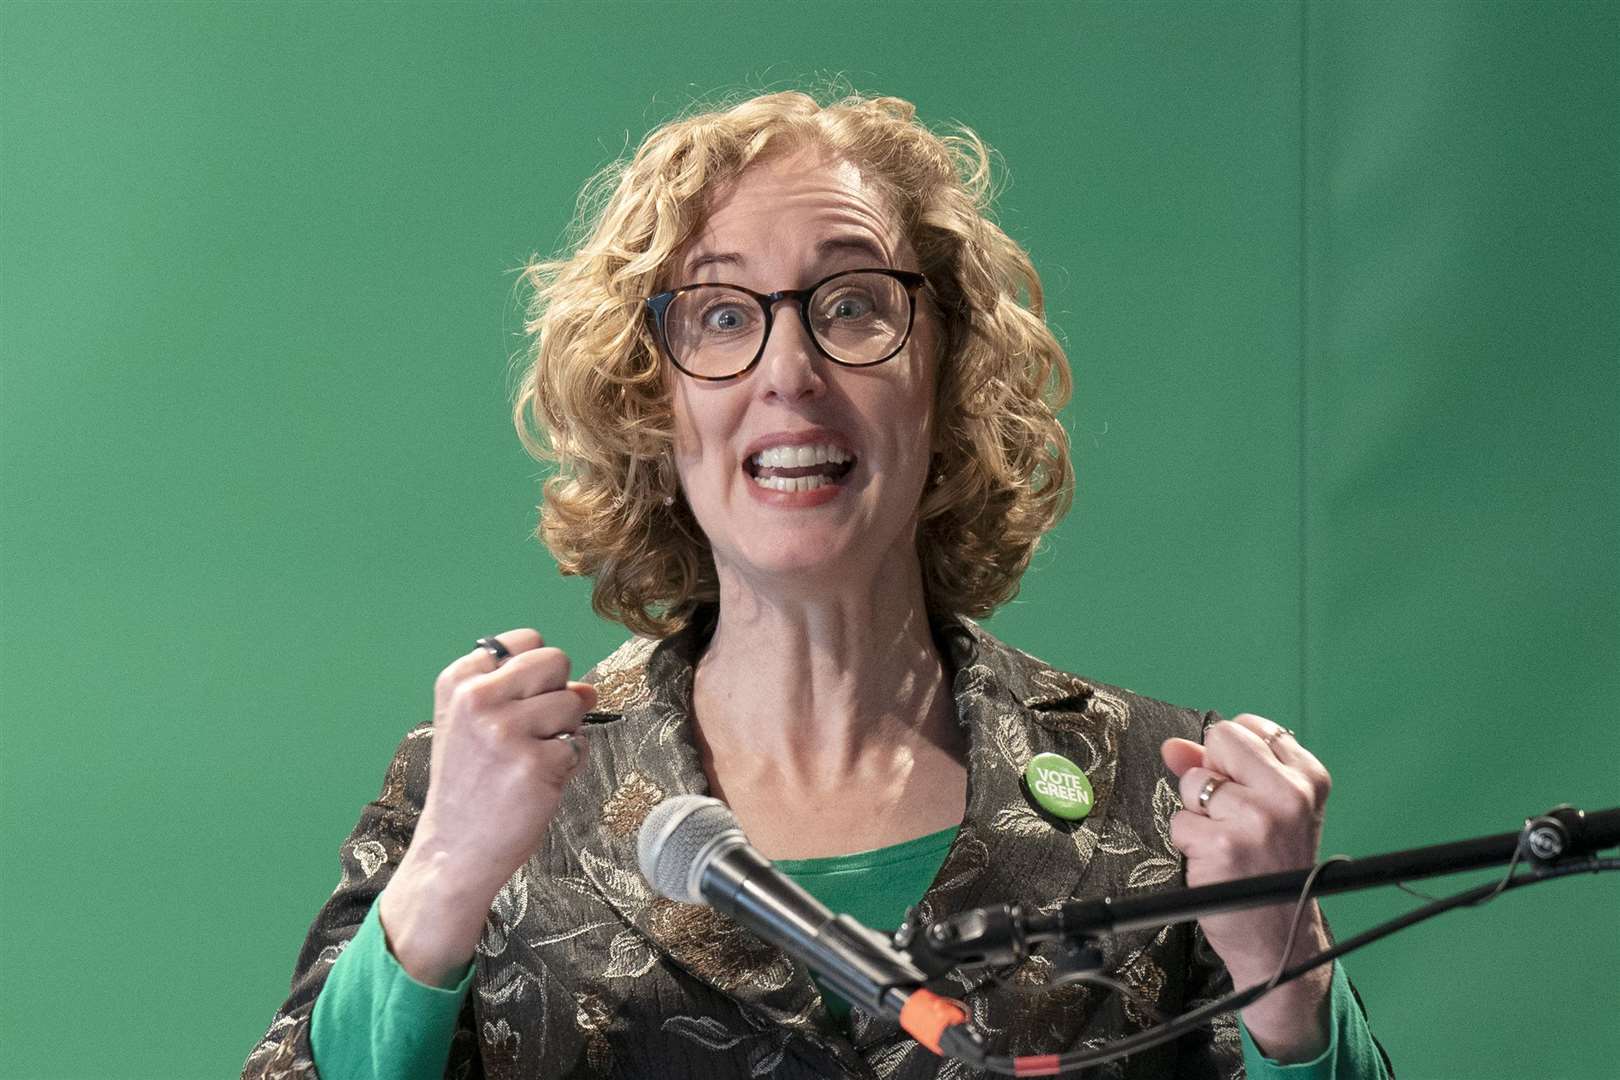 And in Edinburgh, Scottish Greens co-leader Lorna Slater launched her party’s manifesto, proposing a wealth tax and an end to oil and gas companies advertising (Jane Barlow/PA)